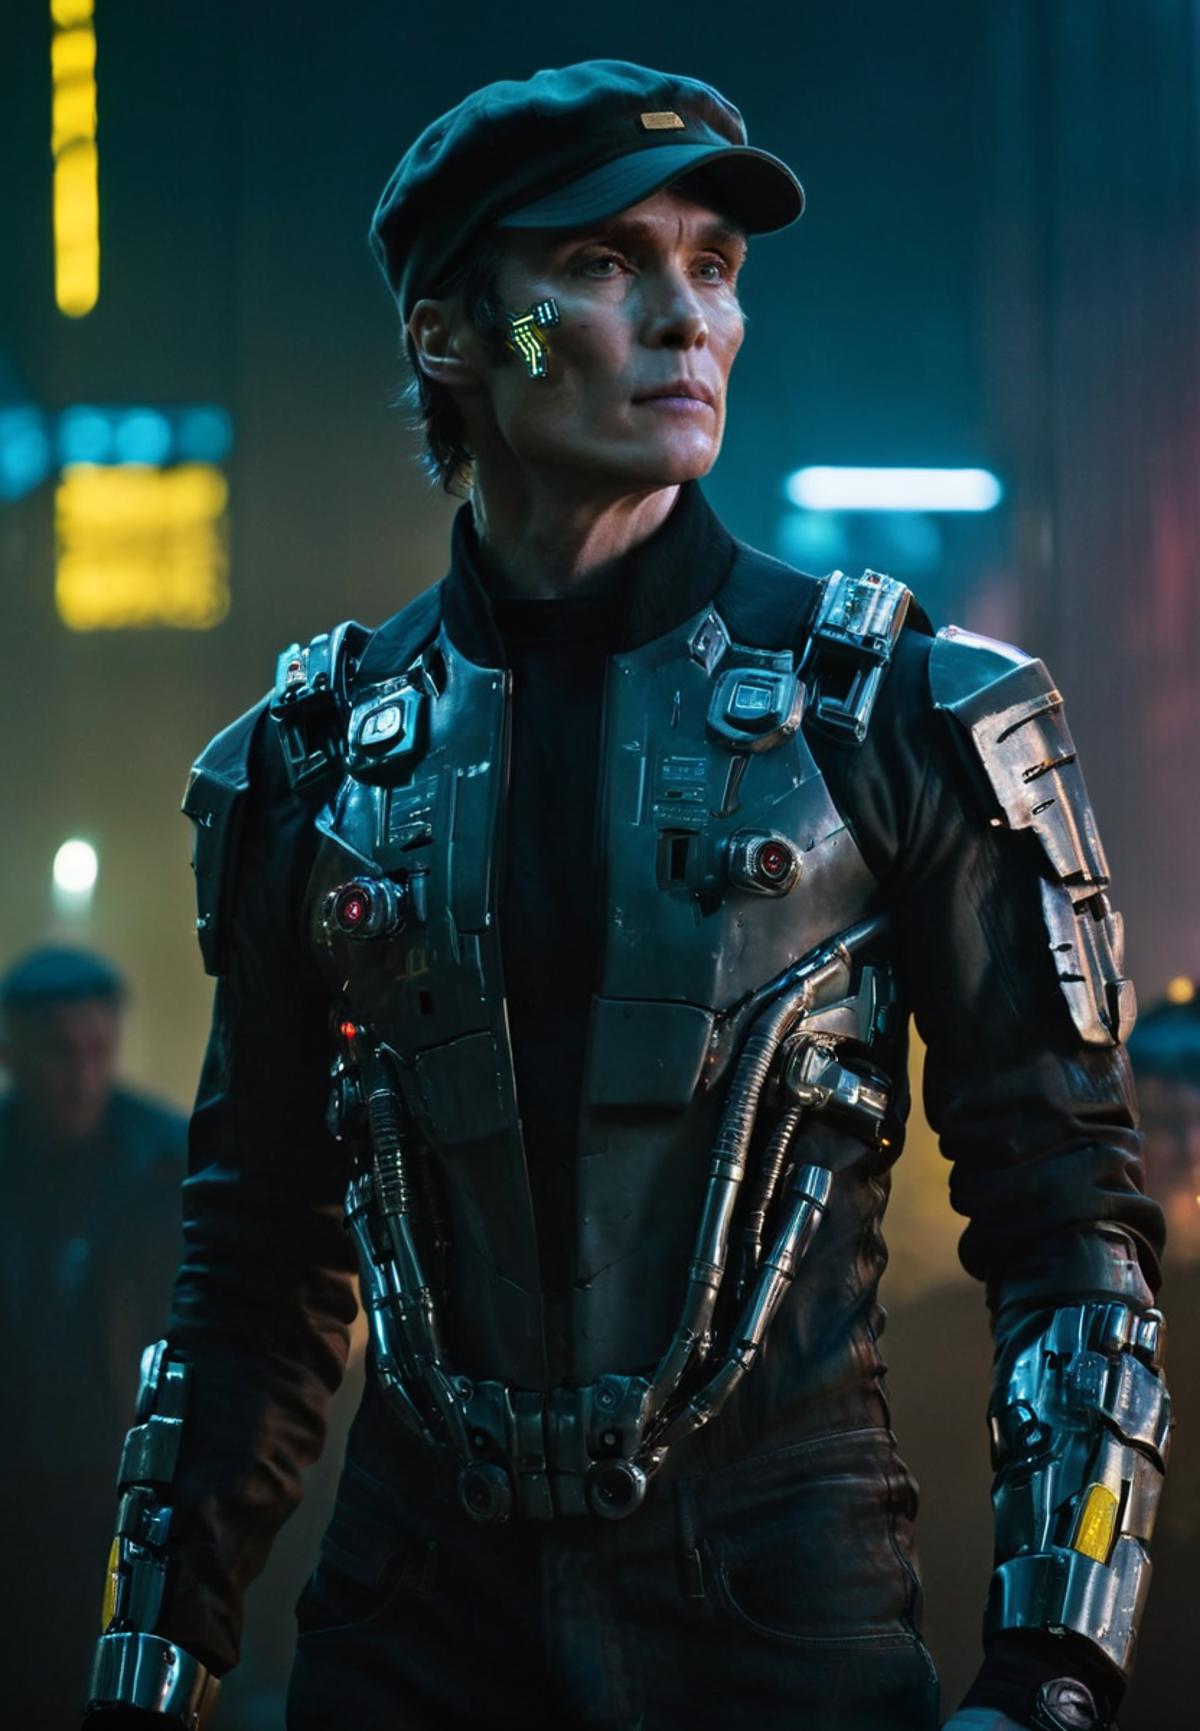 A man in a futuristic suit looking at the camera.